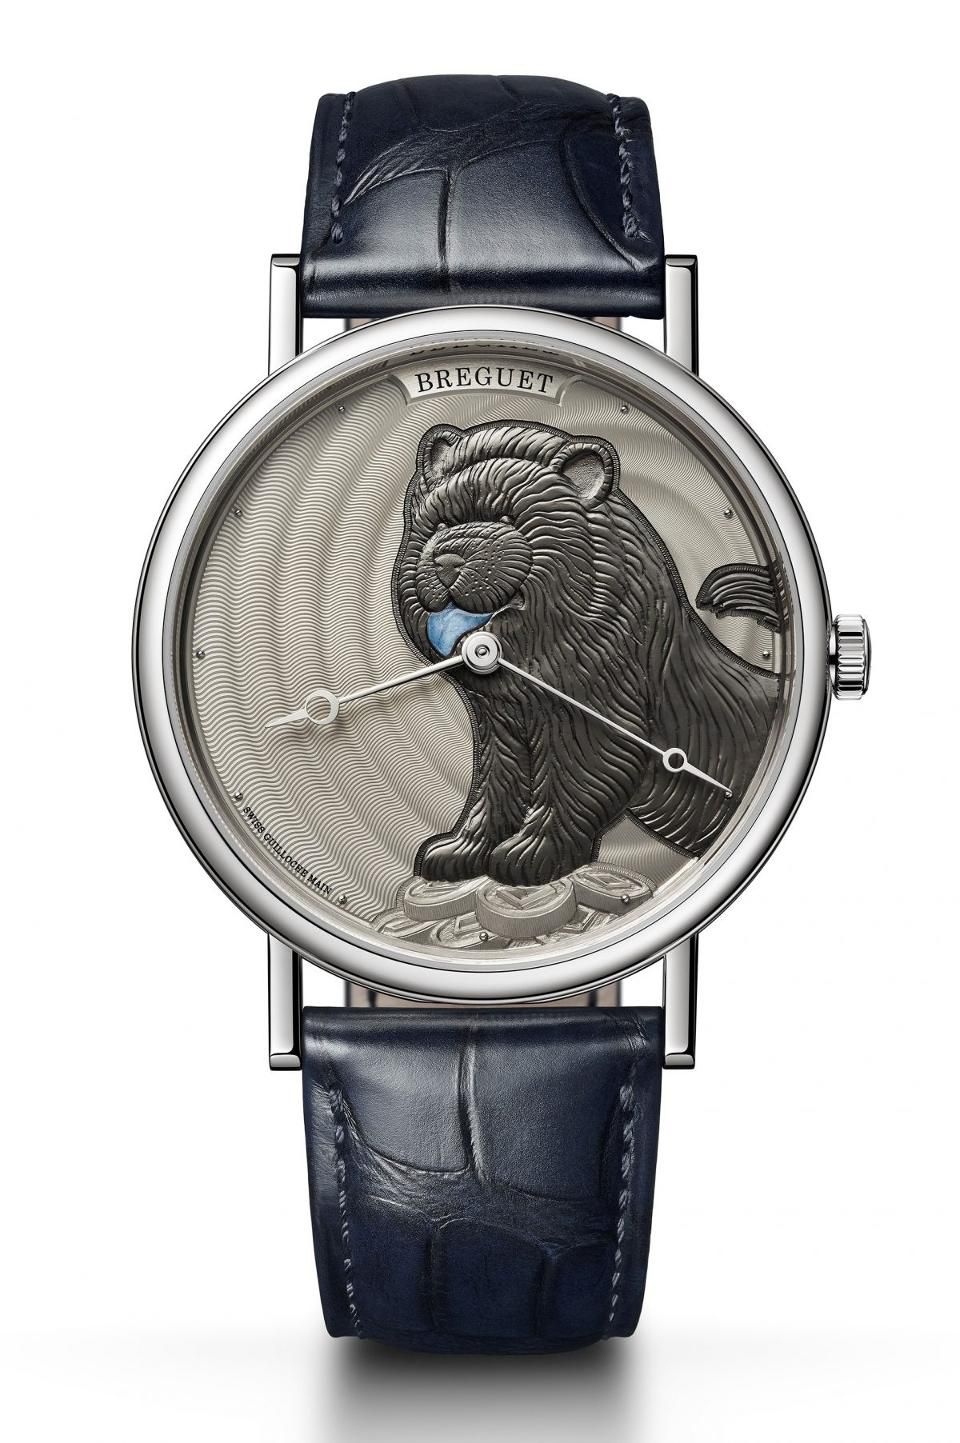 The Breguet Classic 7145 is limited to 8 pieces and pays tribute to the art of guilloche  with a hand-engraved image of a Chow-Chow dog. 